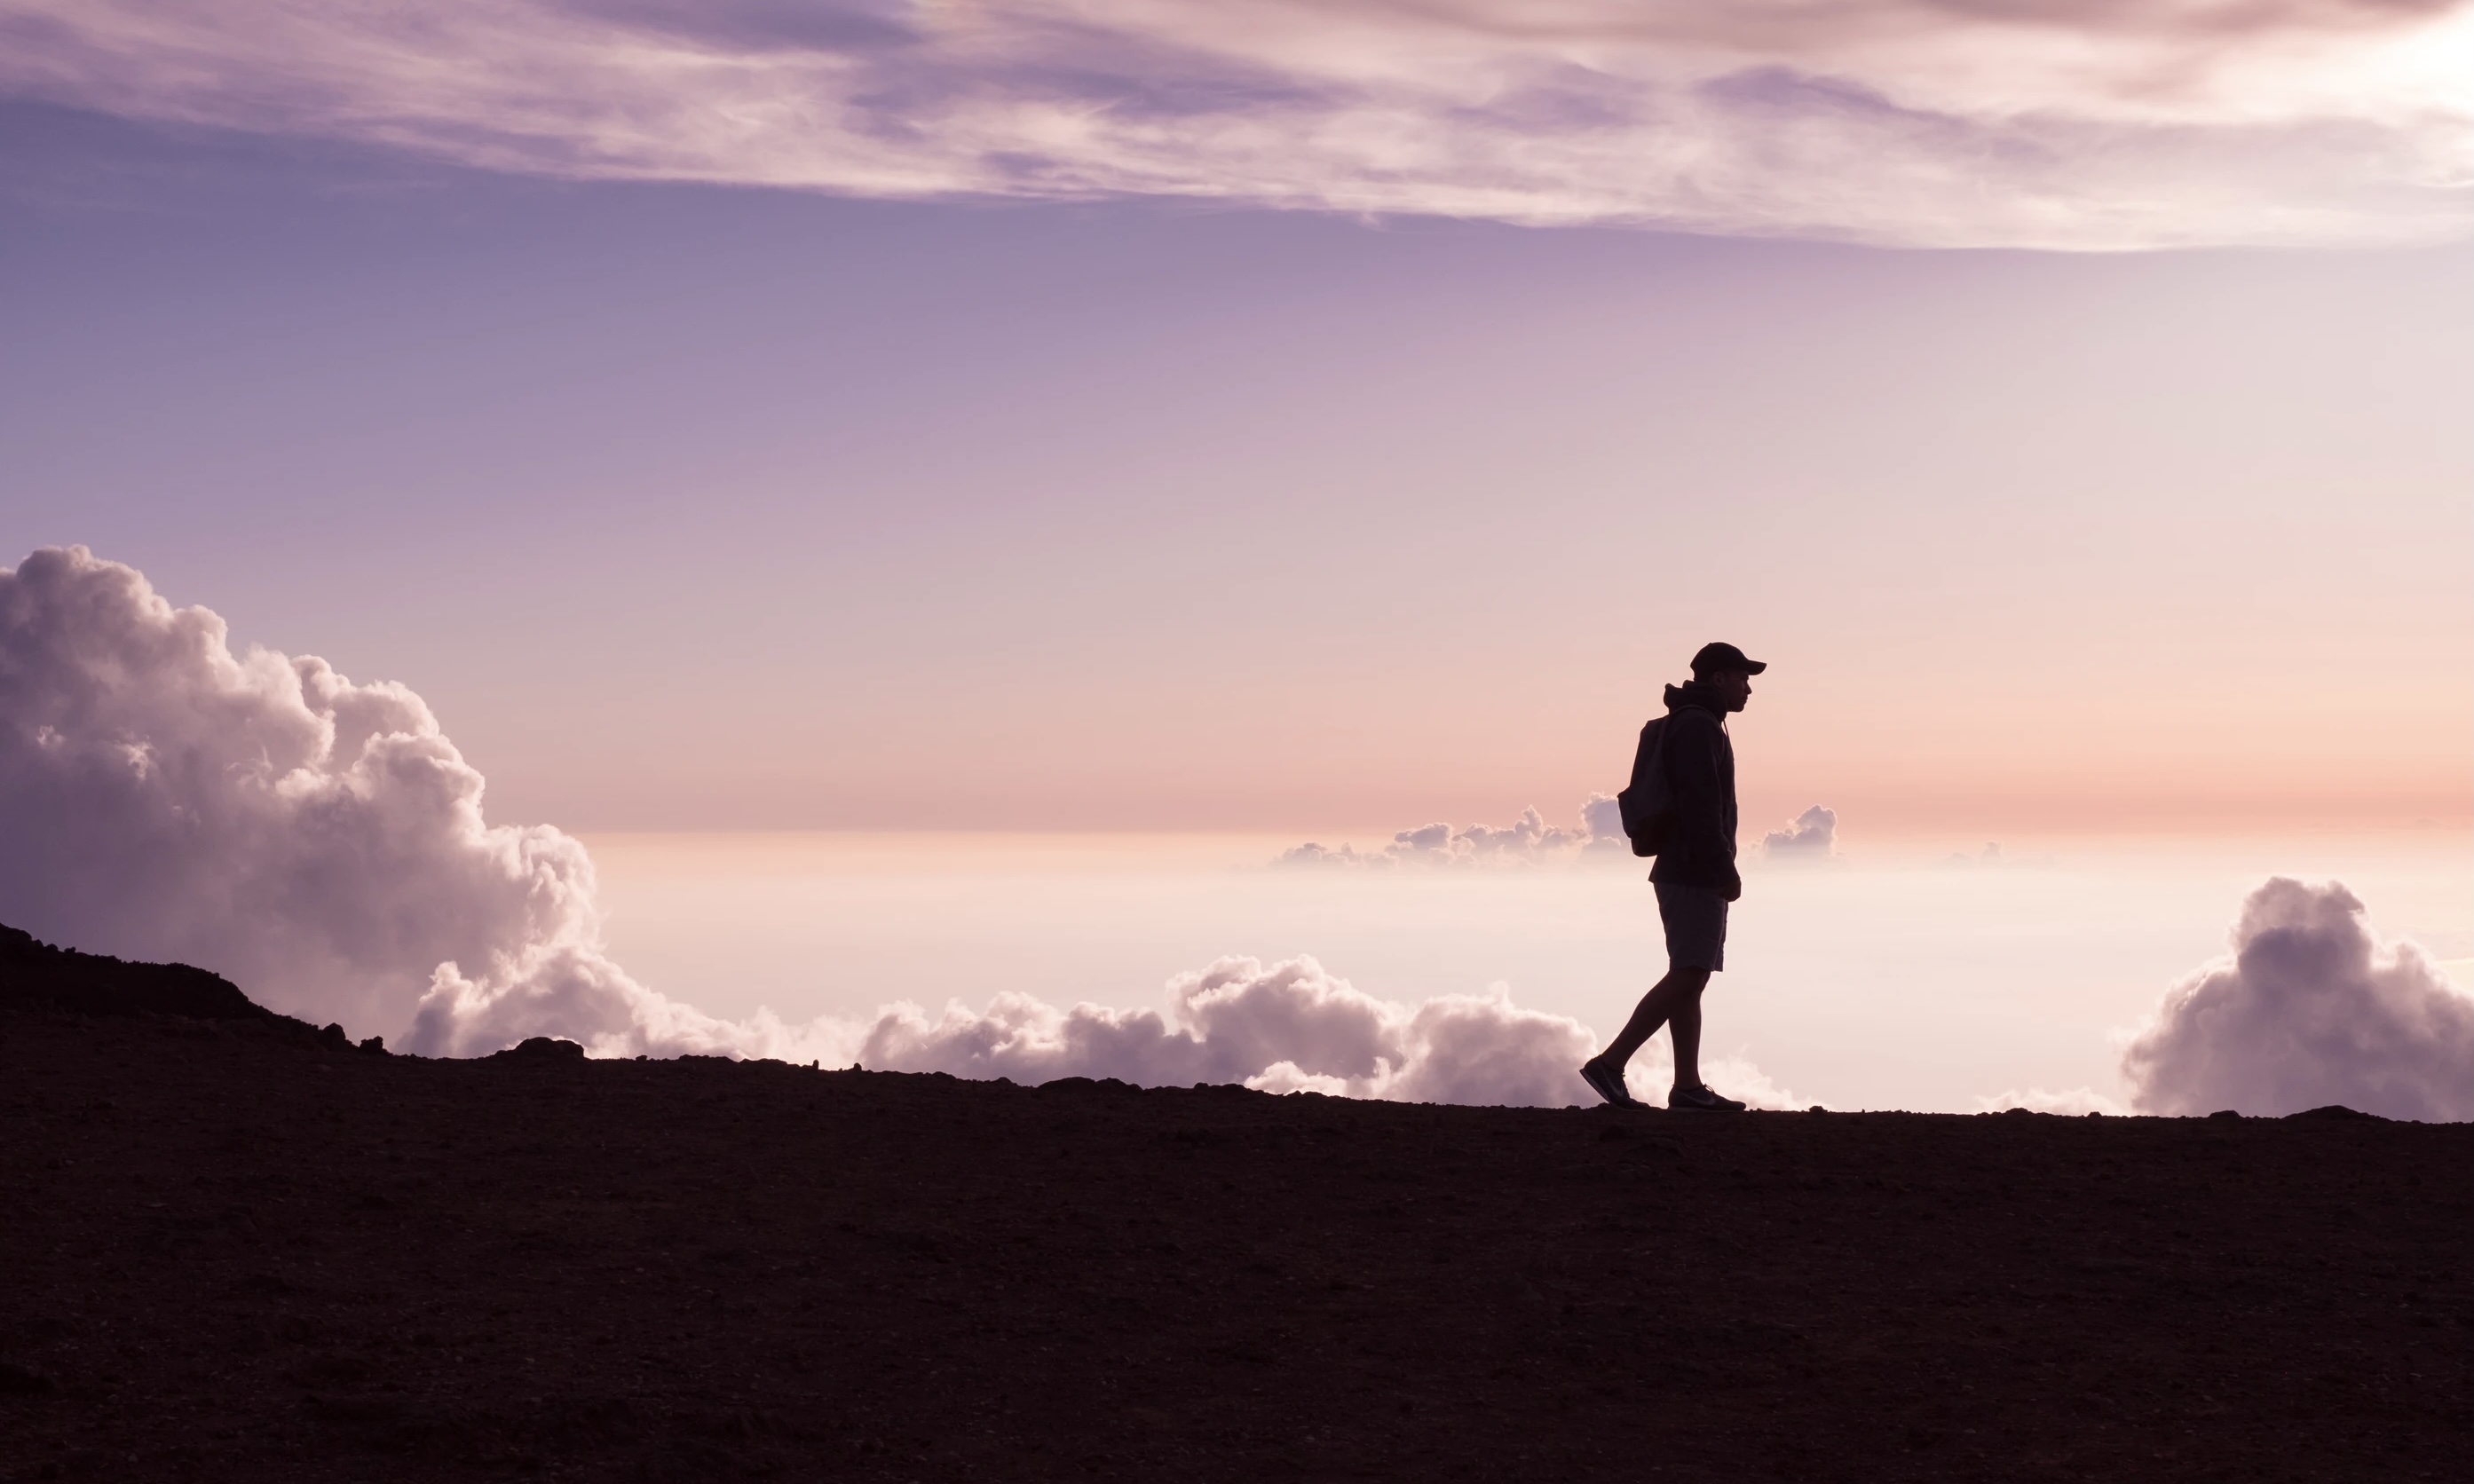 Silhouette of Man Walking in Front of Clouds